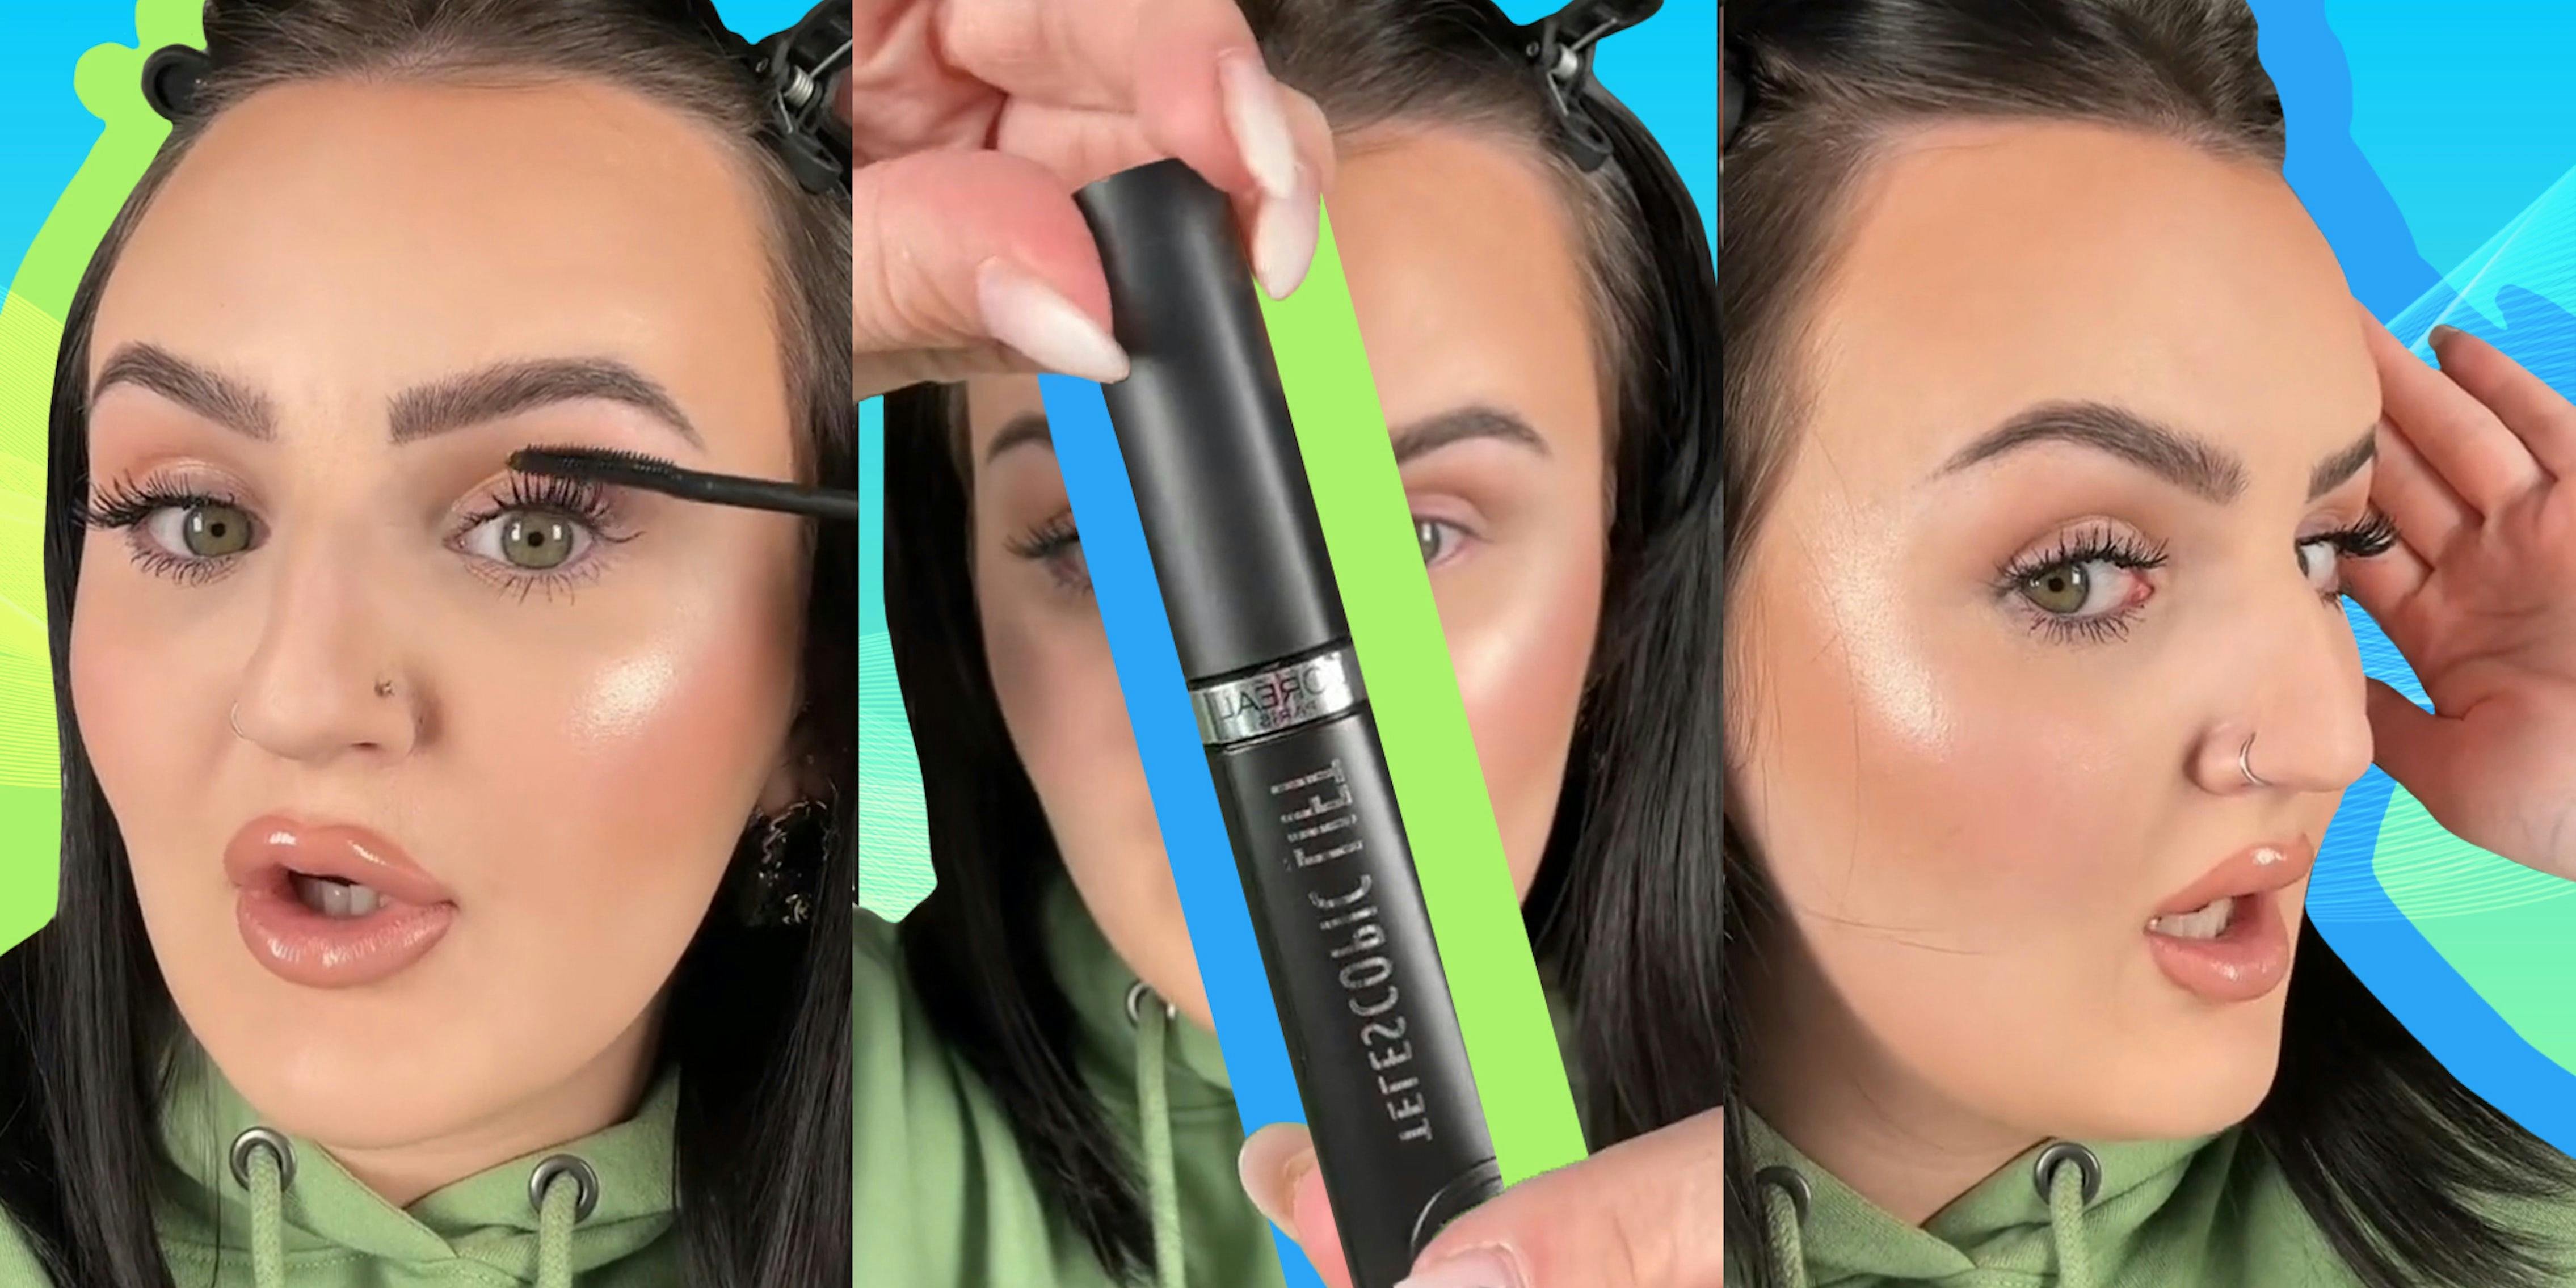 ‘Why Aren’t Influencers Honest Anymore?’ Mikayla Nogueira Accused of Misleading Viewers With False Lashes in Sponsored Mascara TikTok